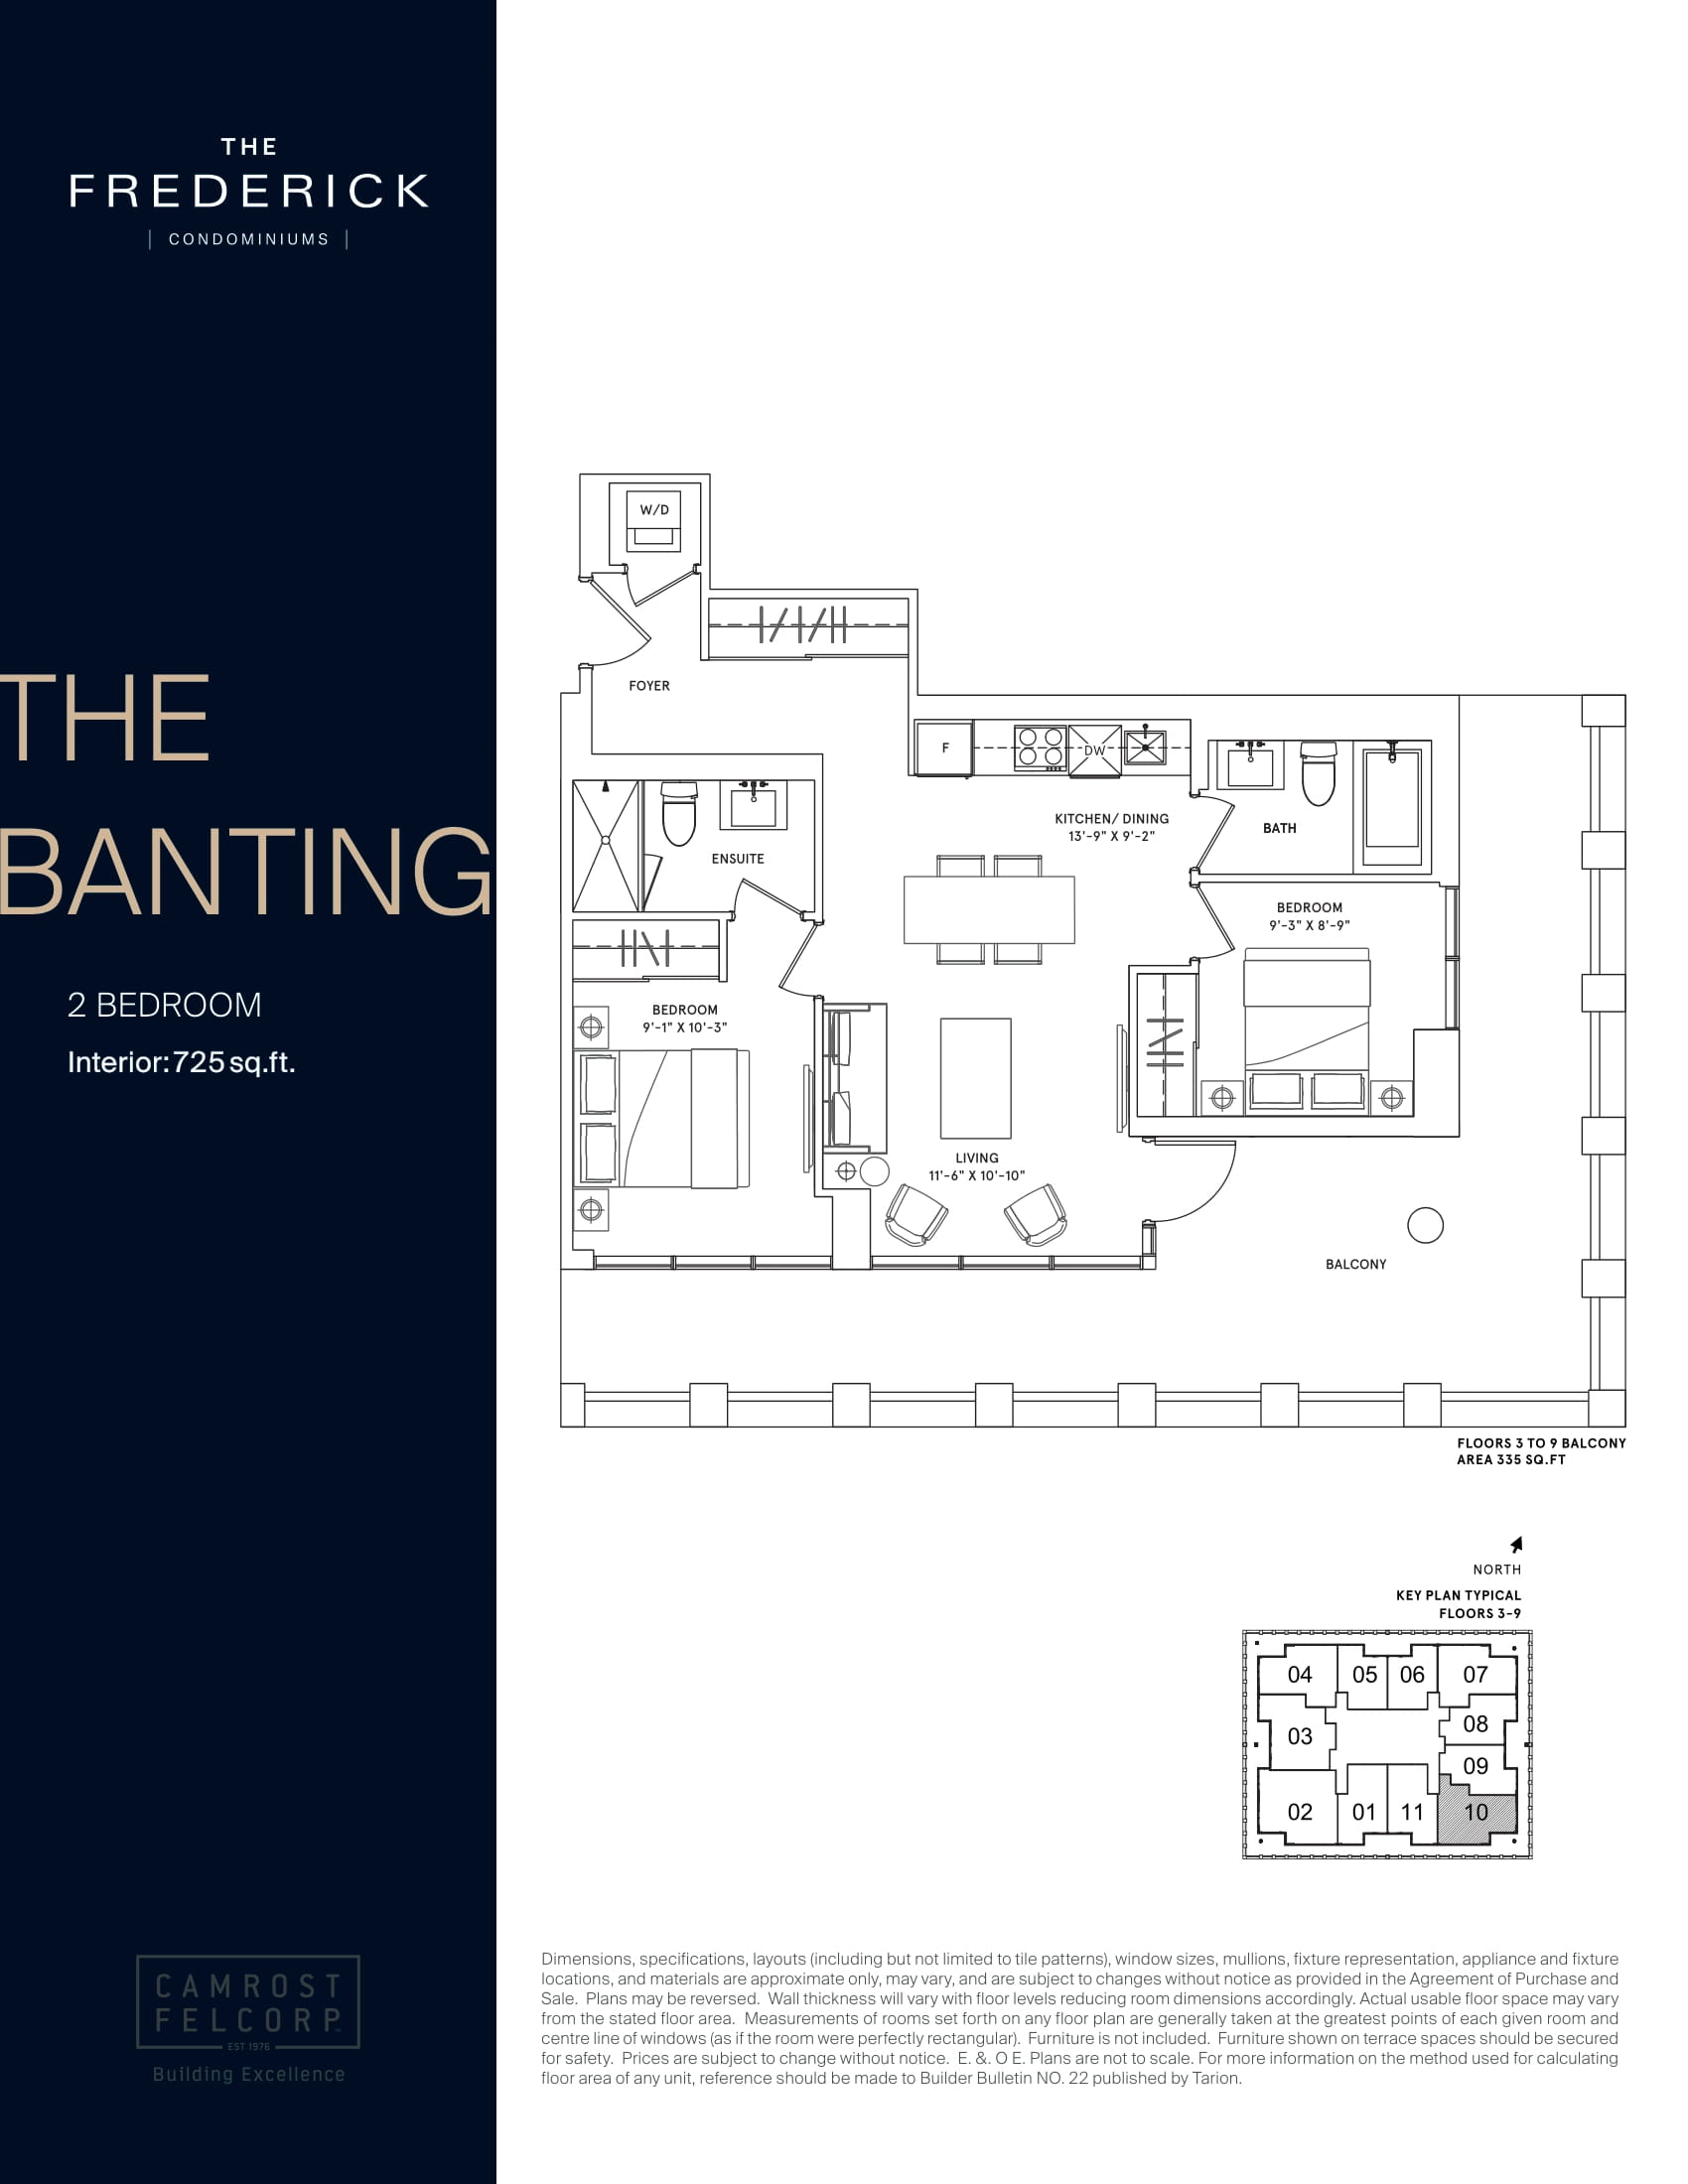 The Banting